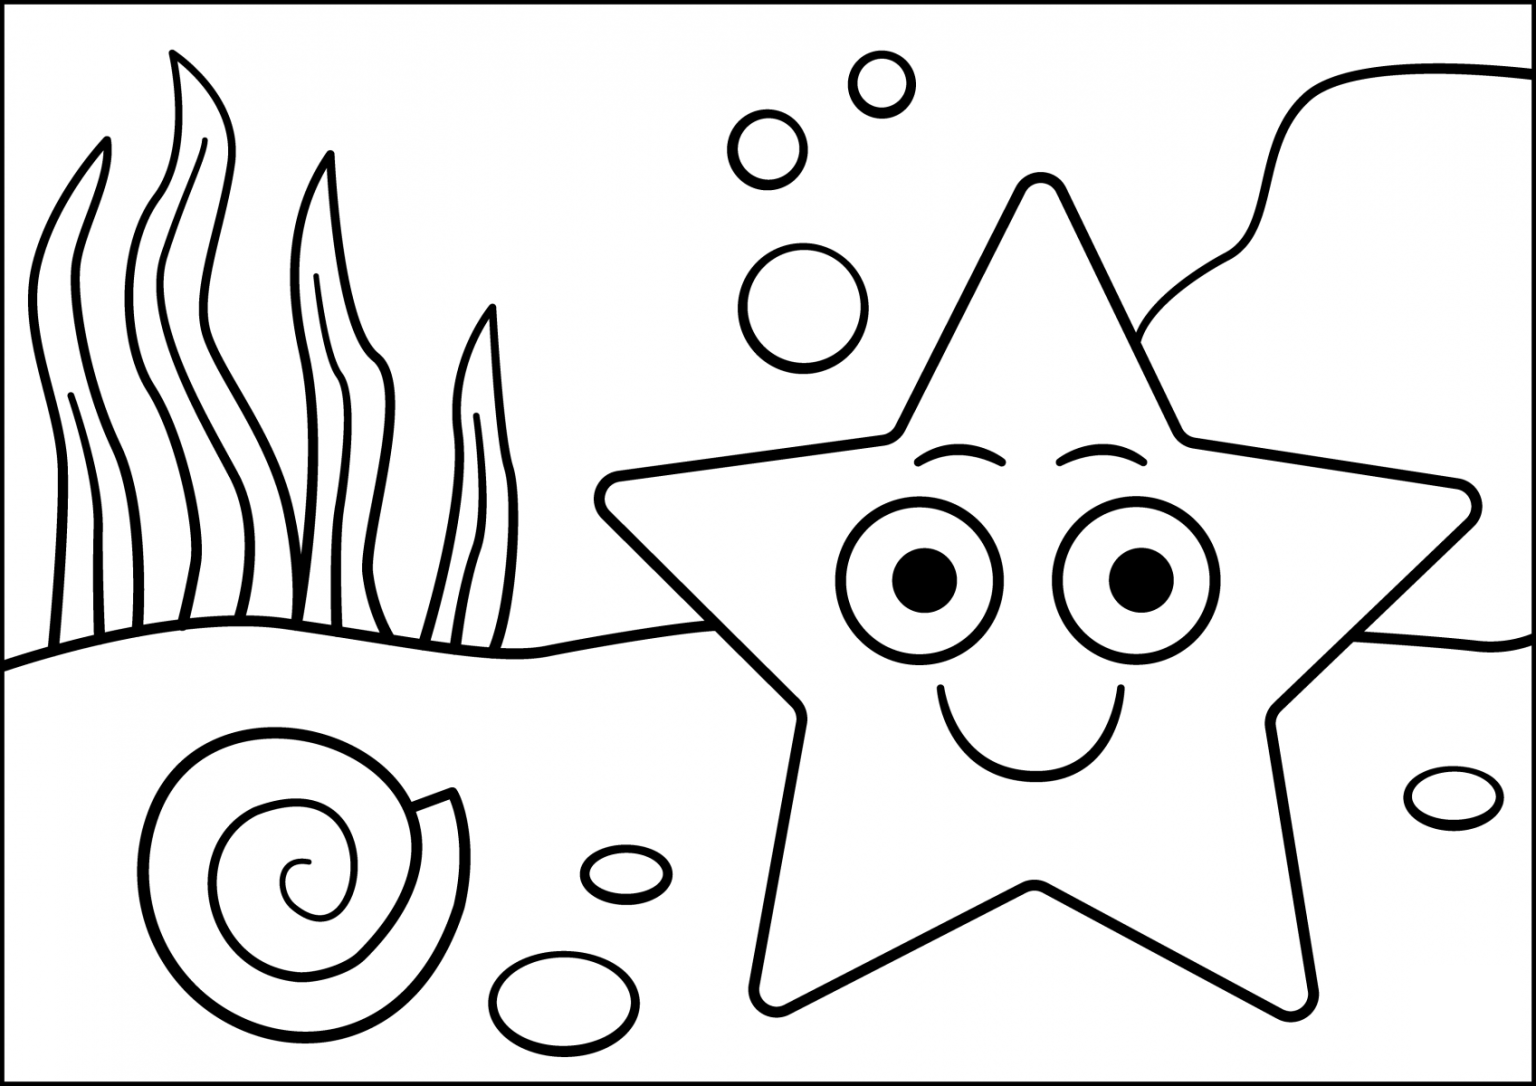 Shapes Coloring Pages - Free Printable Sheets for Kids